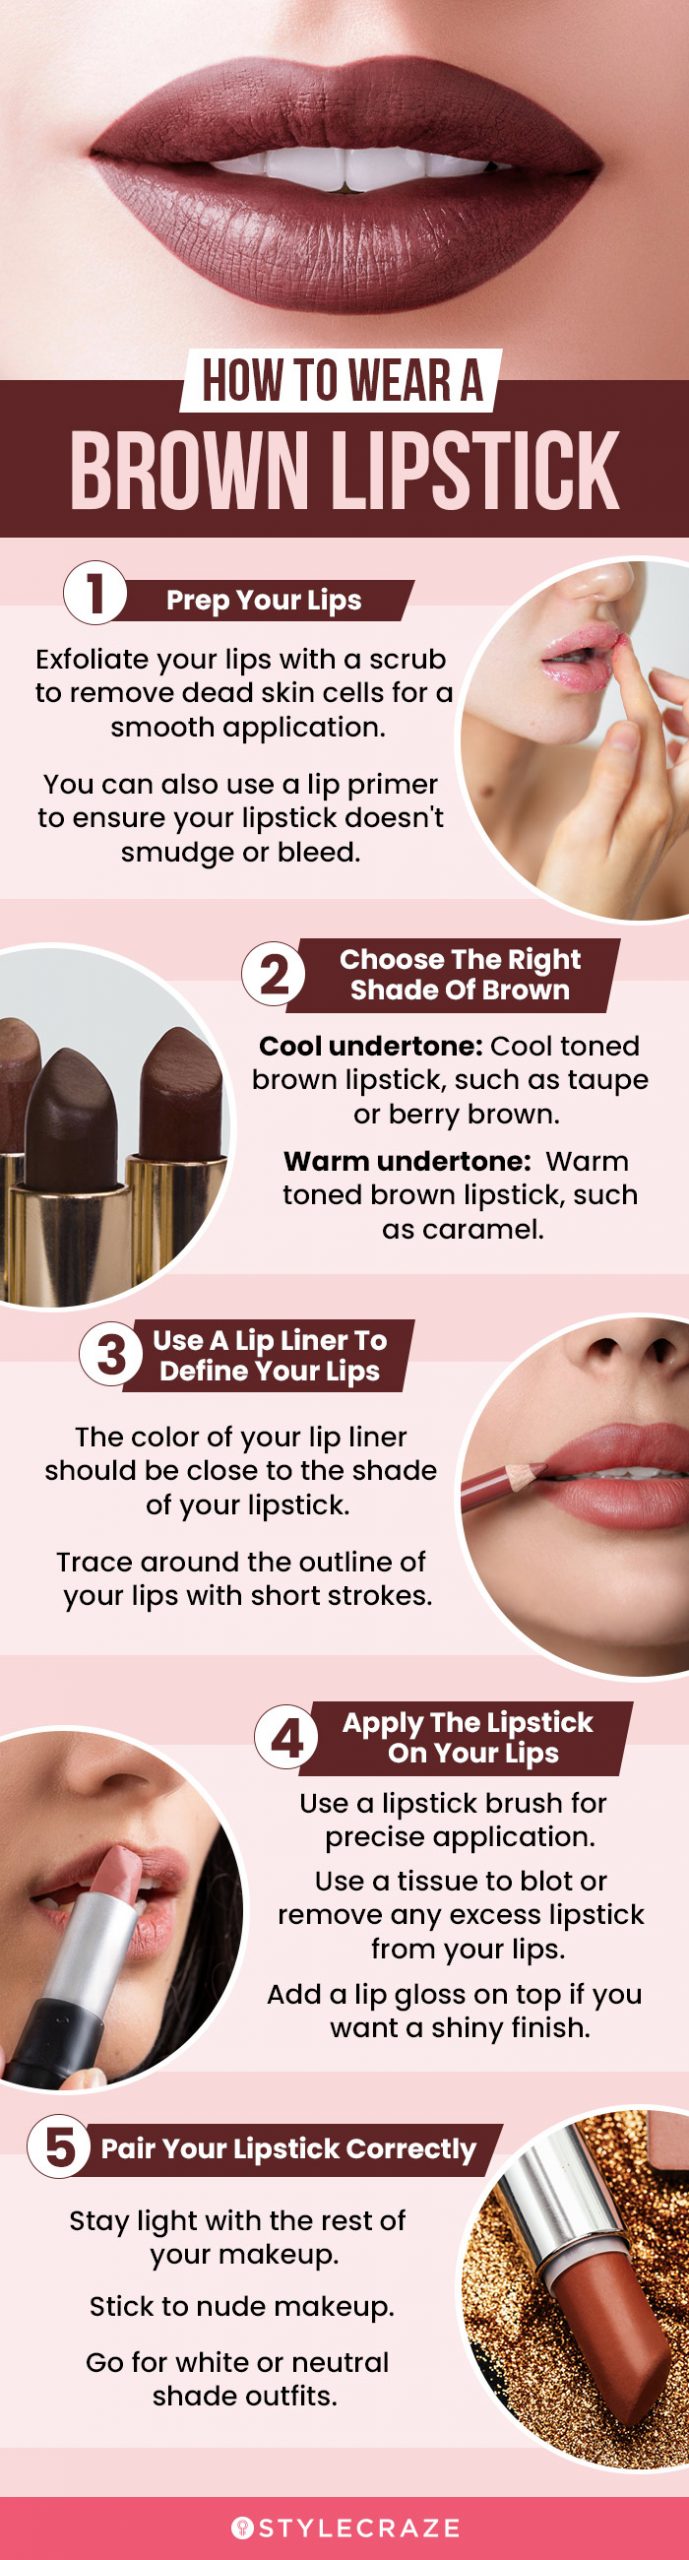 How To Wear A Brown Lipstick (infographic)